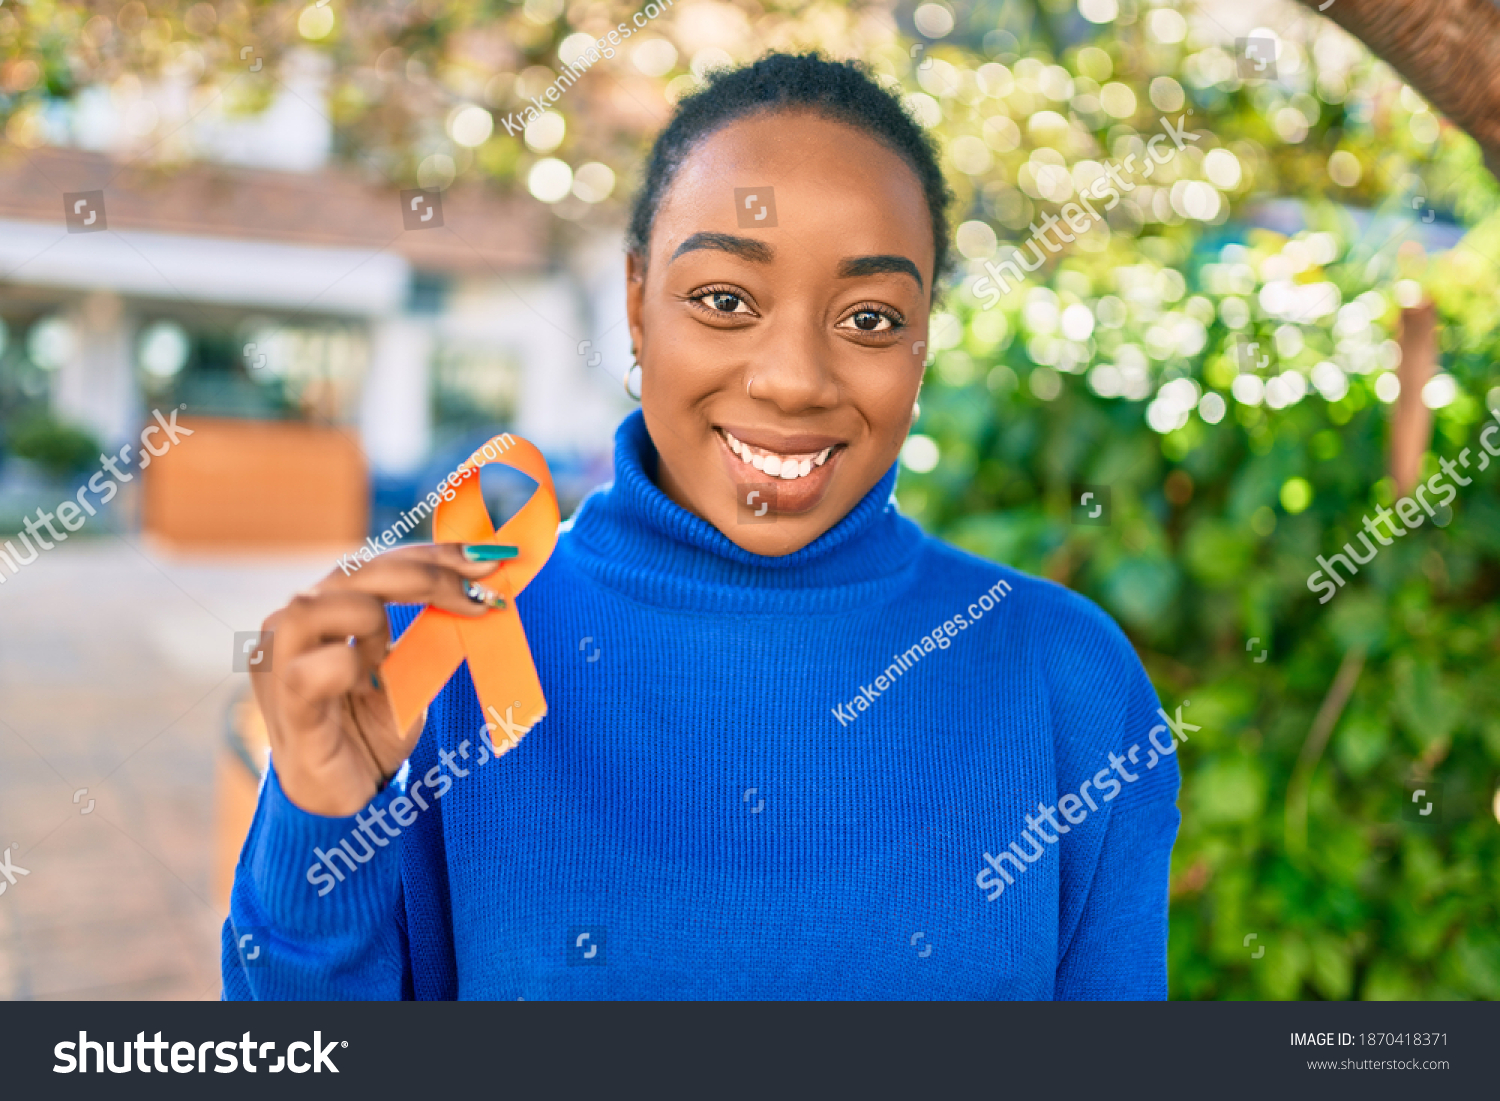 Young african american woman smiling happy holding orange awareness ribbon at the park. #1870418371